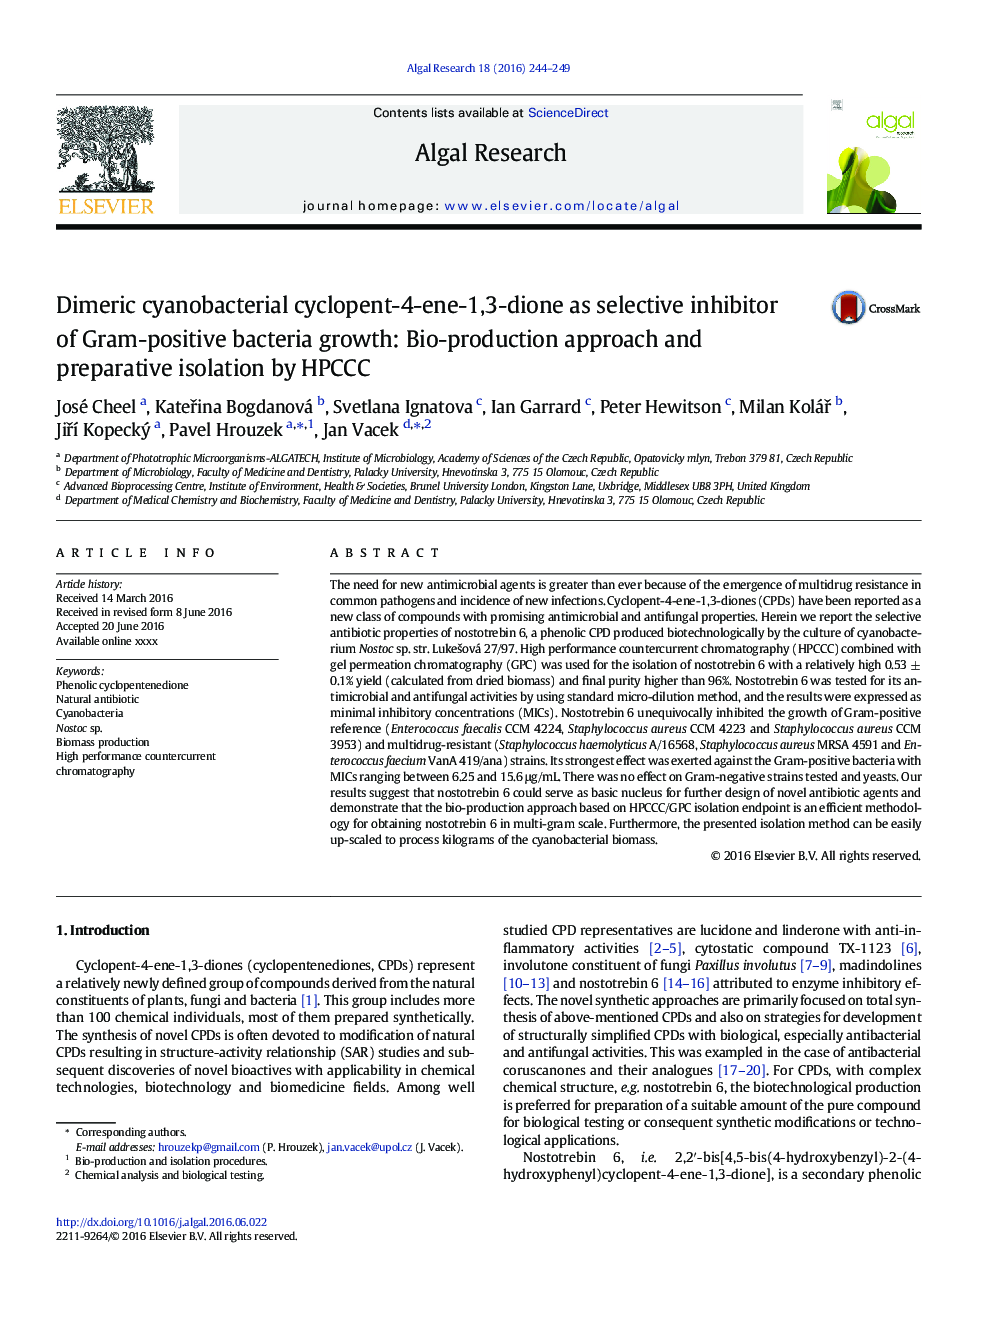 Dimeric cyanobacterial cyclopent-4-ene-1,3-dione as selective inhibitor of Gram-positive bacteria growth: Bio-production approach and preparative isolation by HPCCC